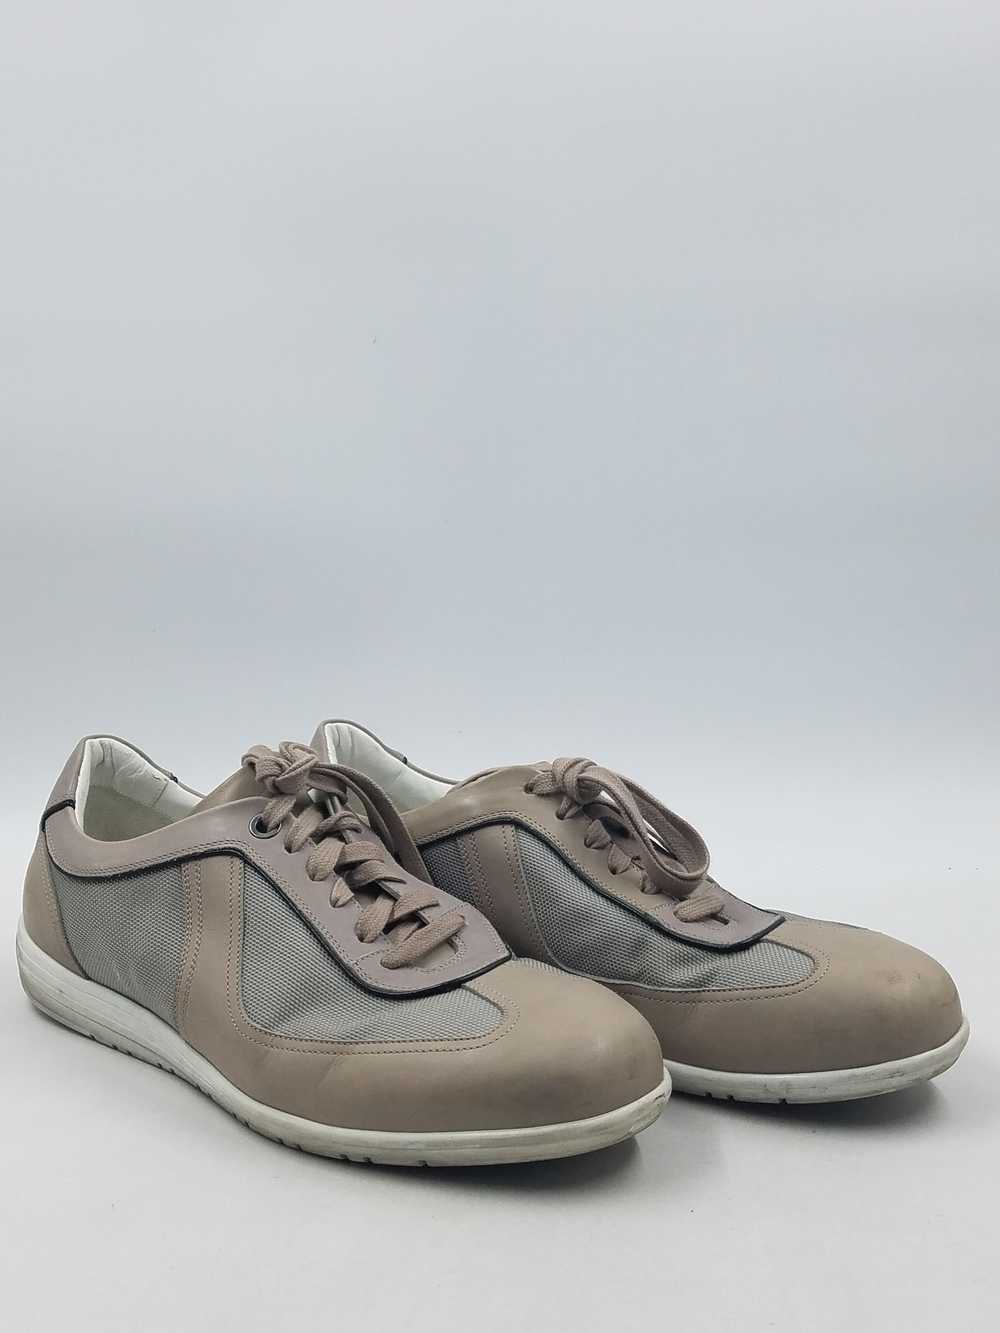 Canali Taupe Gray Leather Trim Sneaker M 10 - image 3